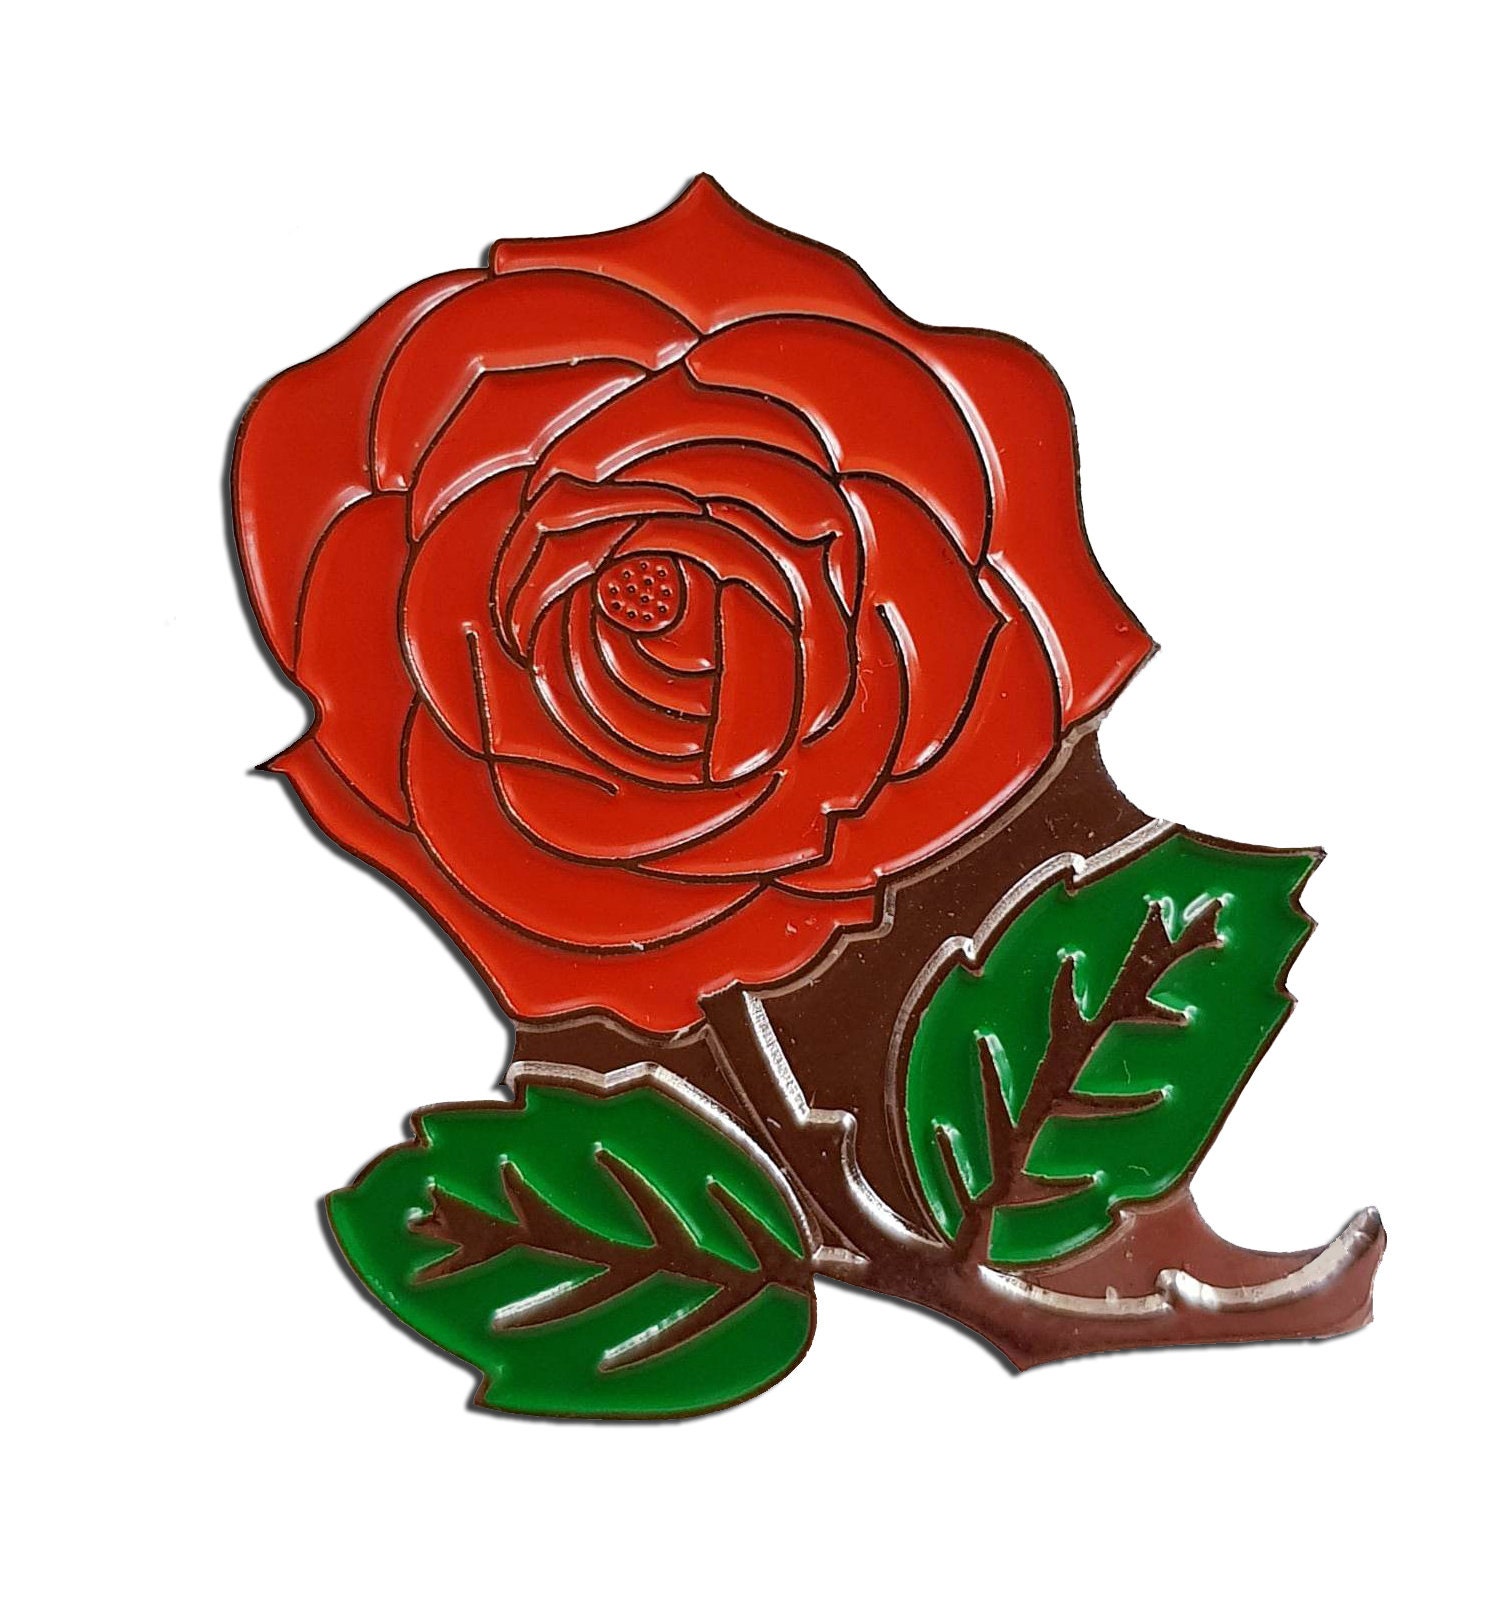 SHOP AWARDS AND GIFTS Red Rose Flower Enamel Metal Lapel Pin, Retro Pins  for Clothes, Bulk Pack of 12, Poly Bagged, 7/8 Inch